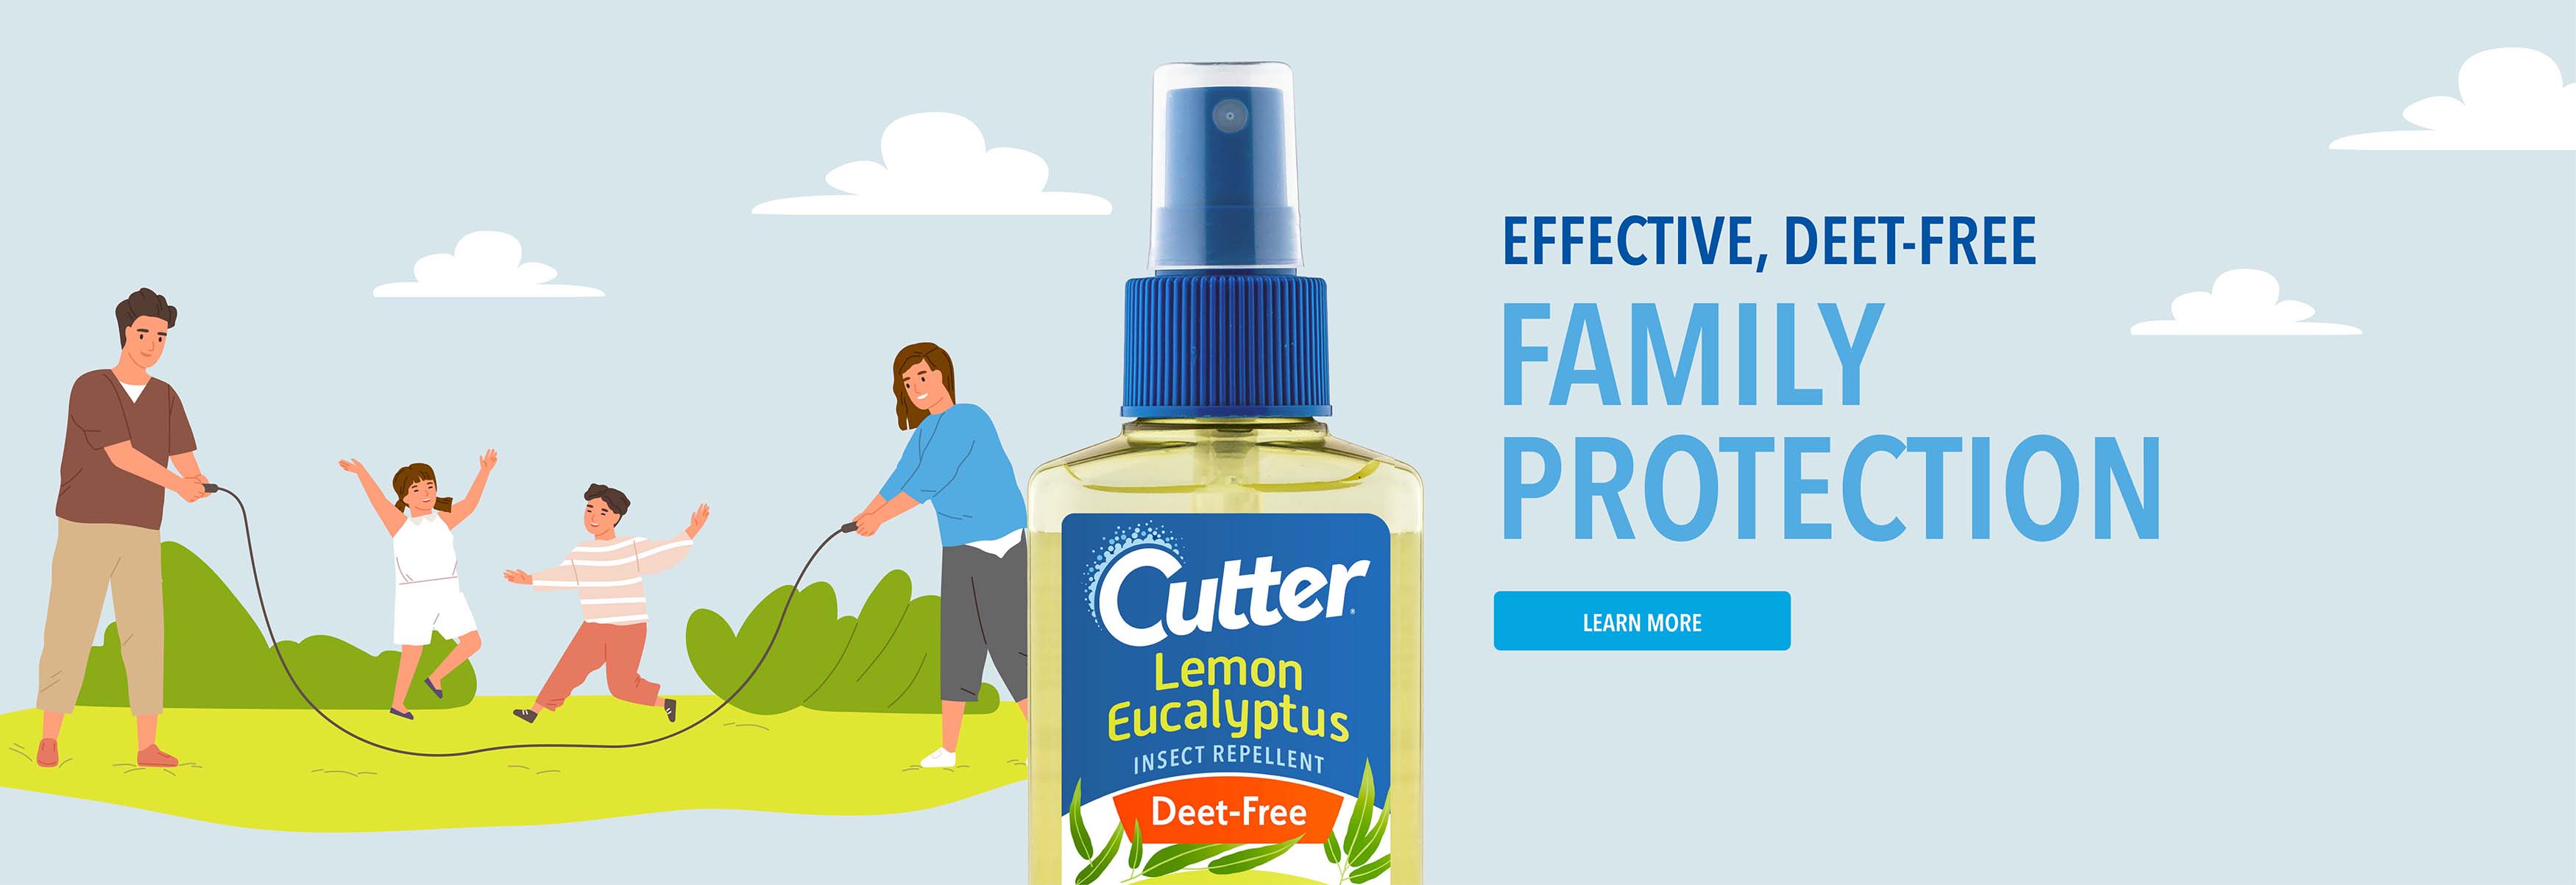 EFFECTIVE, DEET-FREE FAMILY PROTECTION